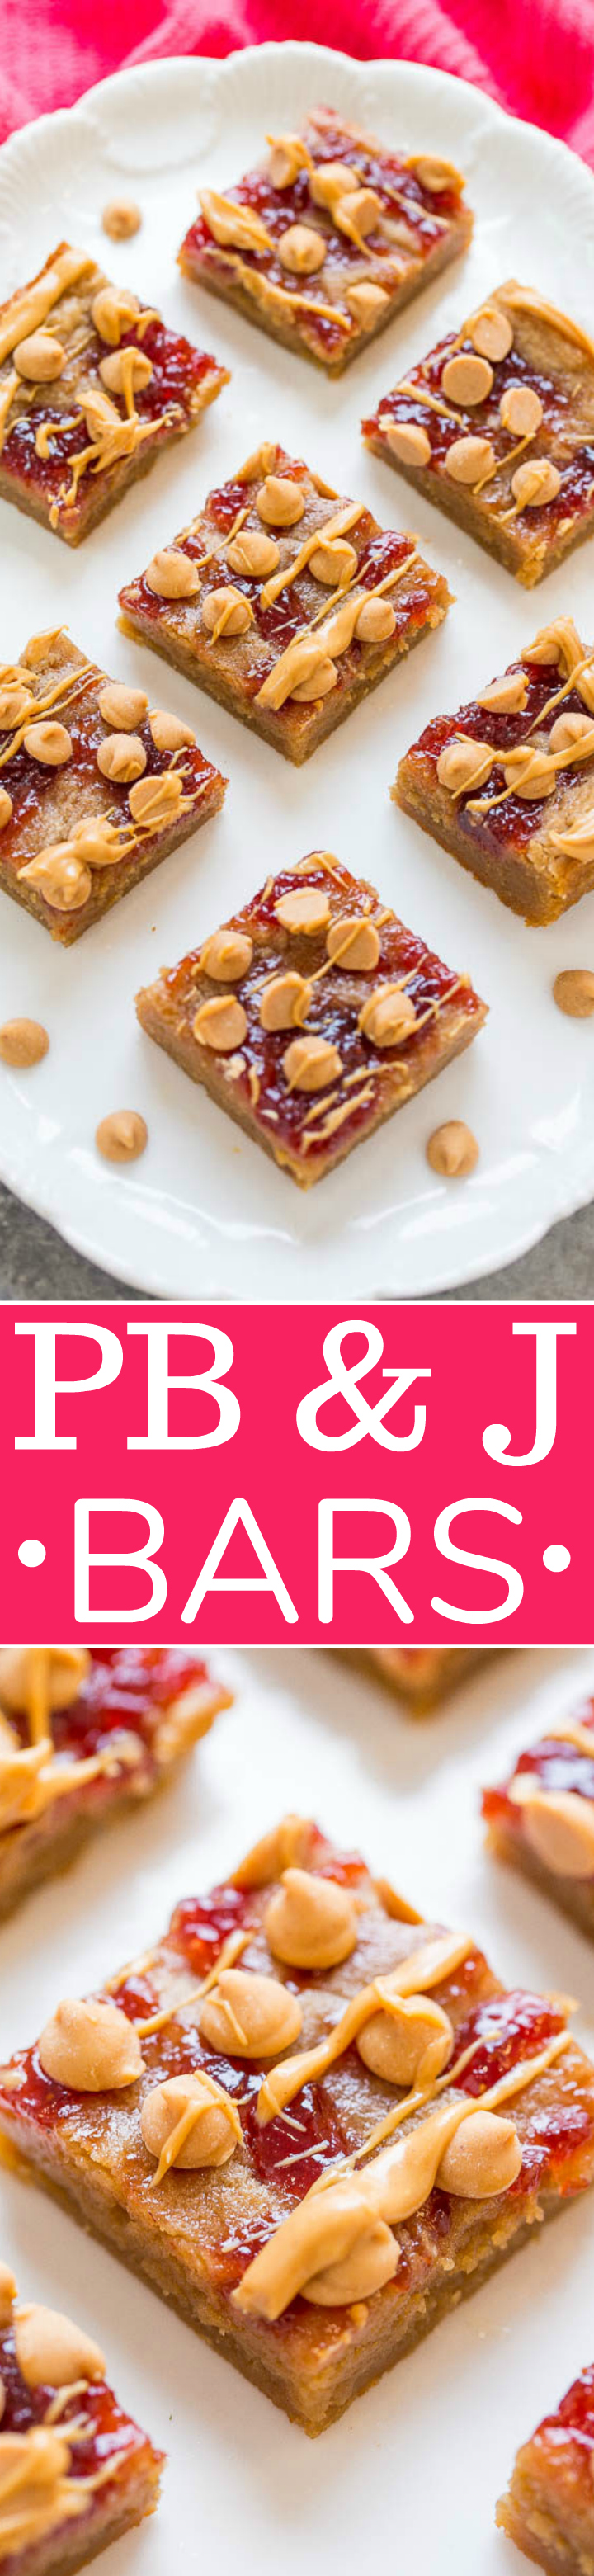 PB & J Bars - Super soft peanut butter bars topped with strawberry jelly, peanut butter chips, and a peanut butter drizzle!! Fast, EASY, and they'll be your new FAVORITE way to eat PB & J!!